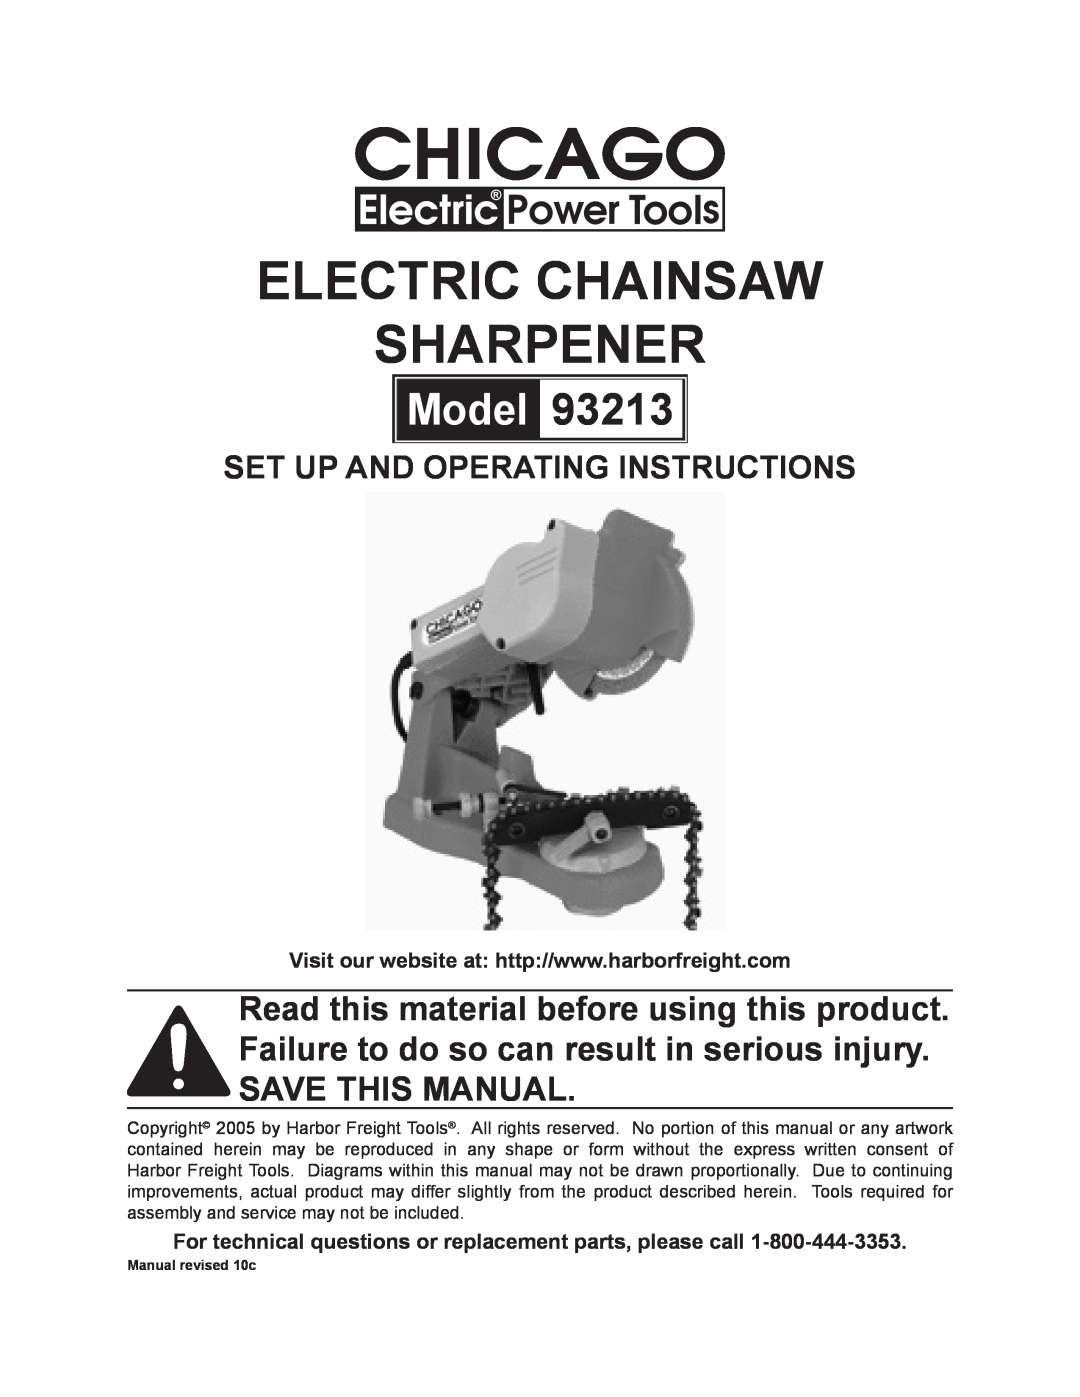 Chicago Electric 93213 manual Electric Chainsaw Sharpener, Model, Set up and Operating Instructions 